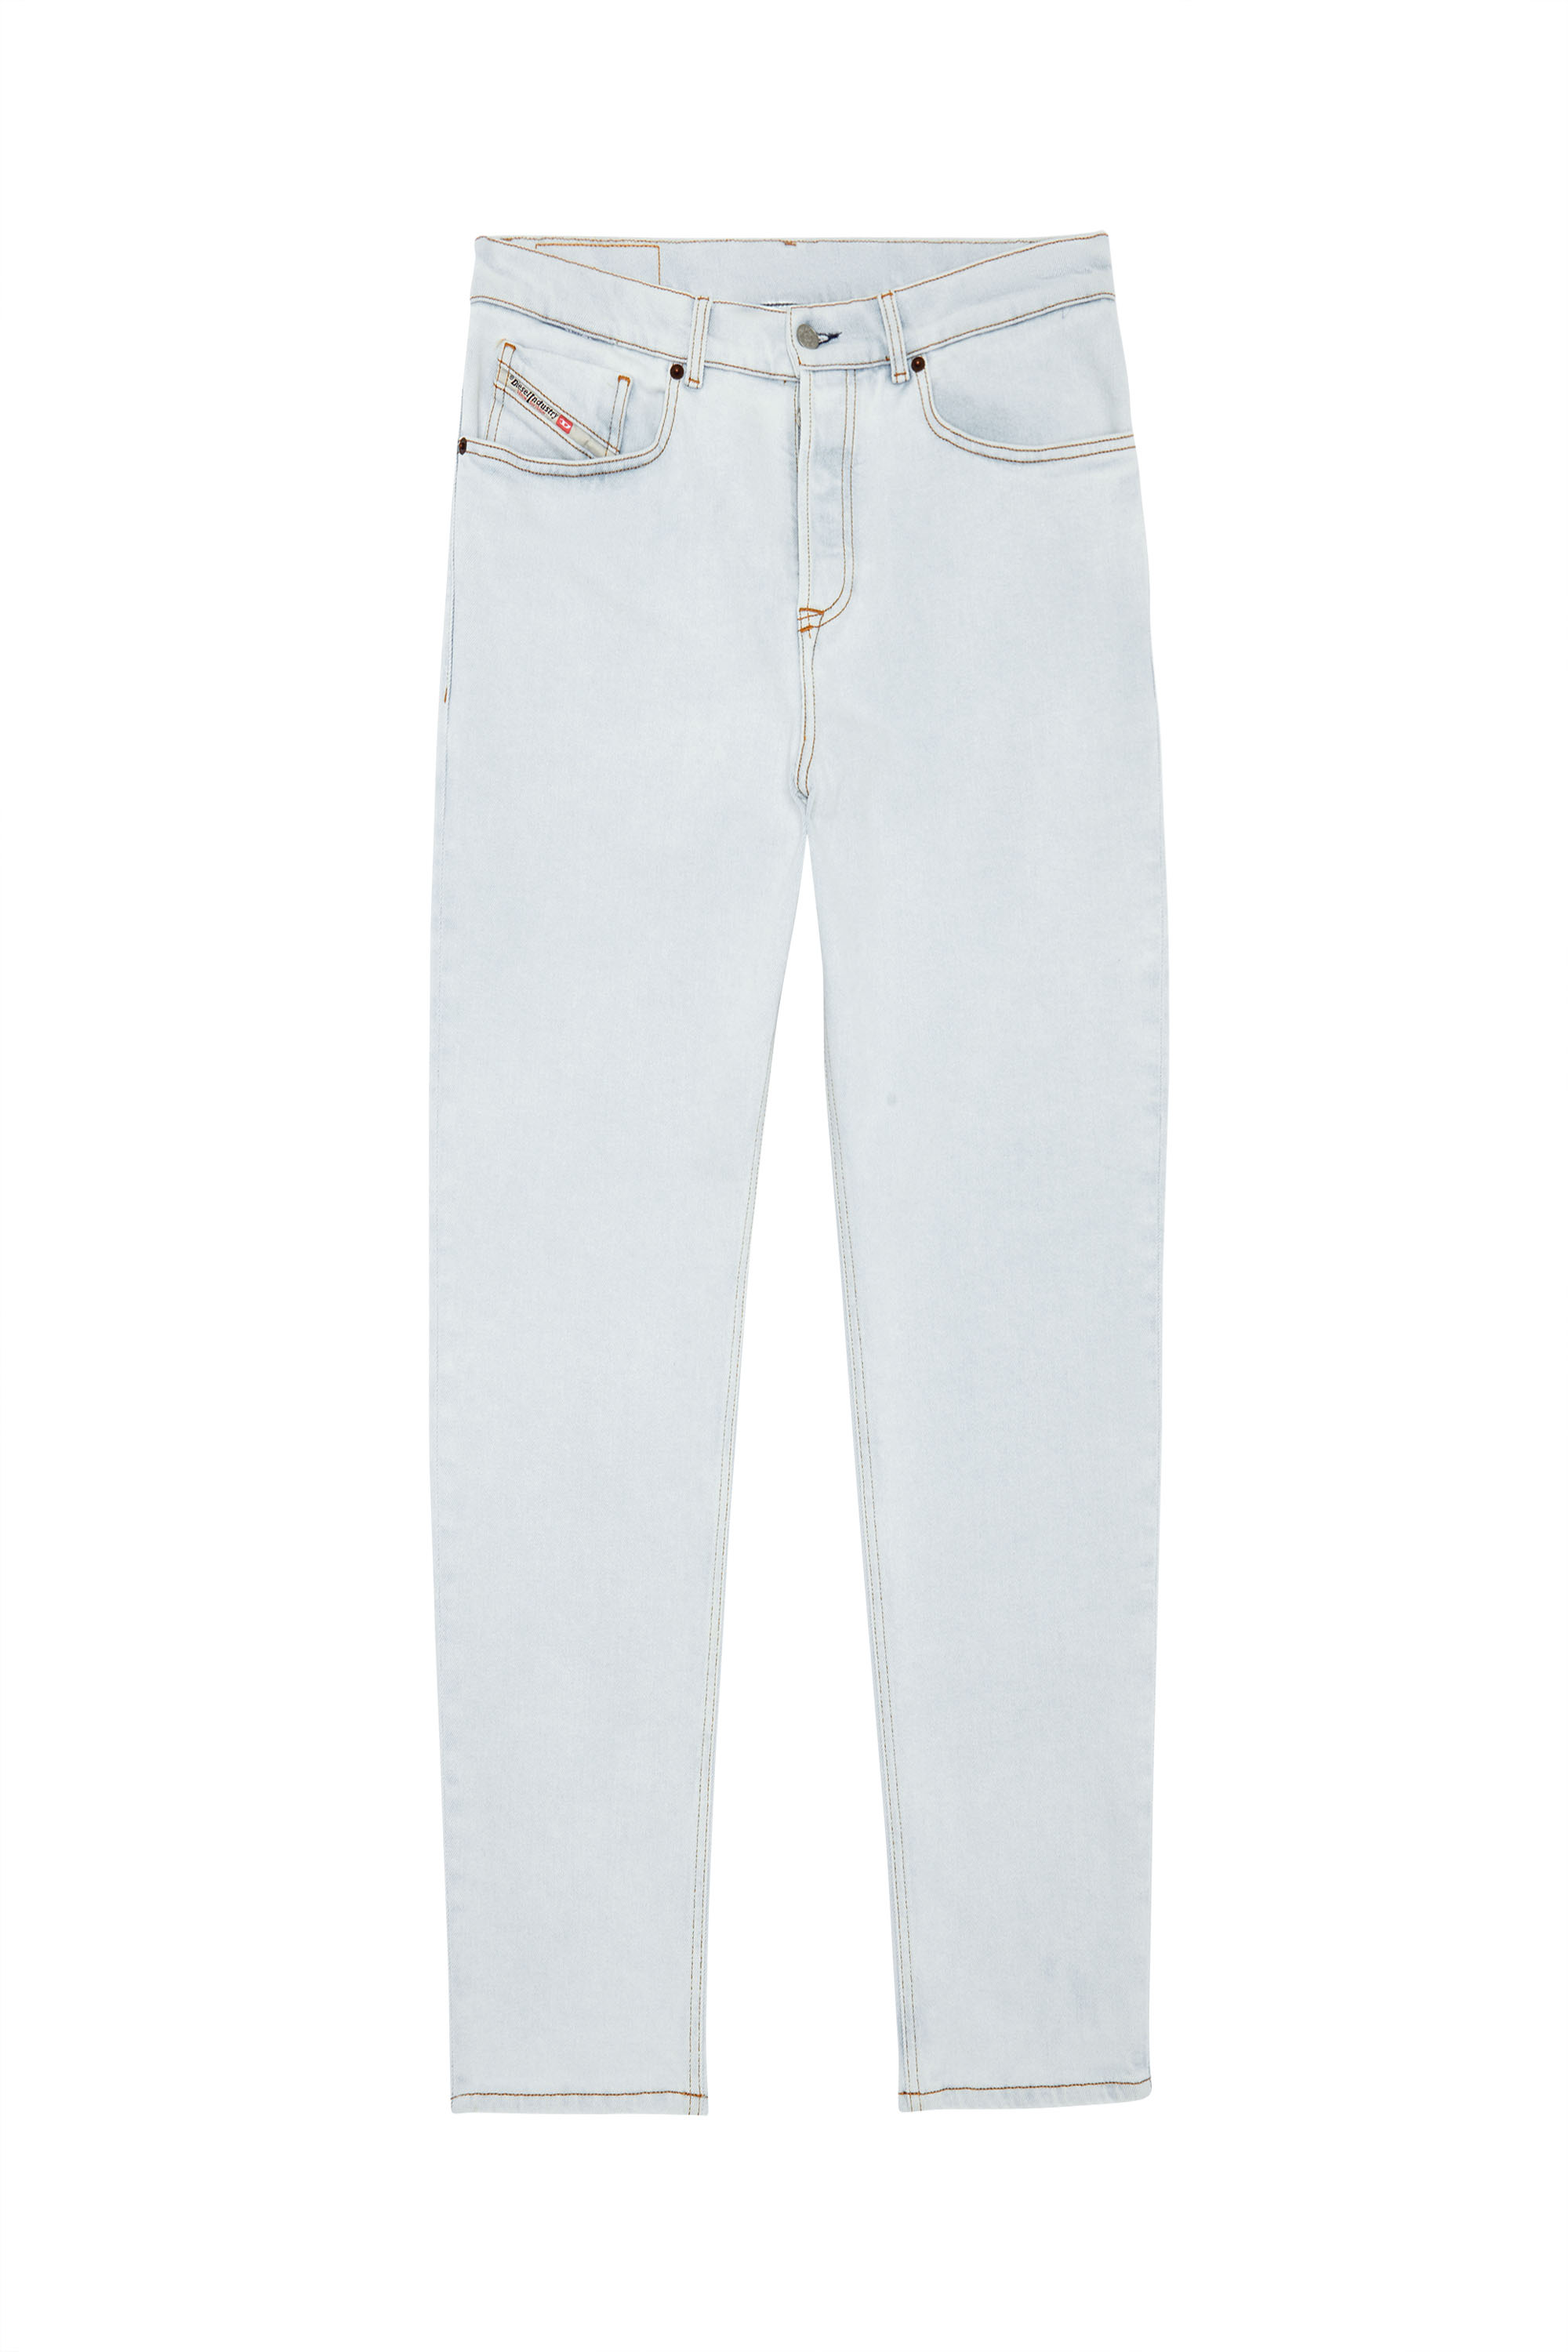 2005 D-FINING 09C06 Tapered Jeans, Light Blue - Jeans